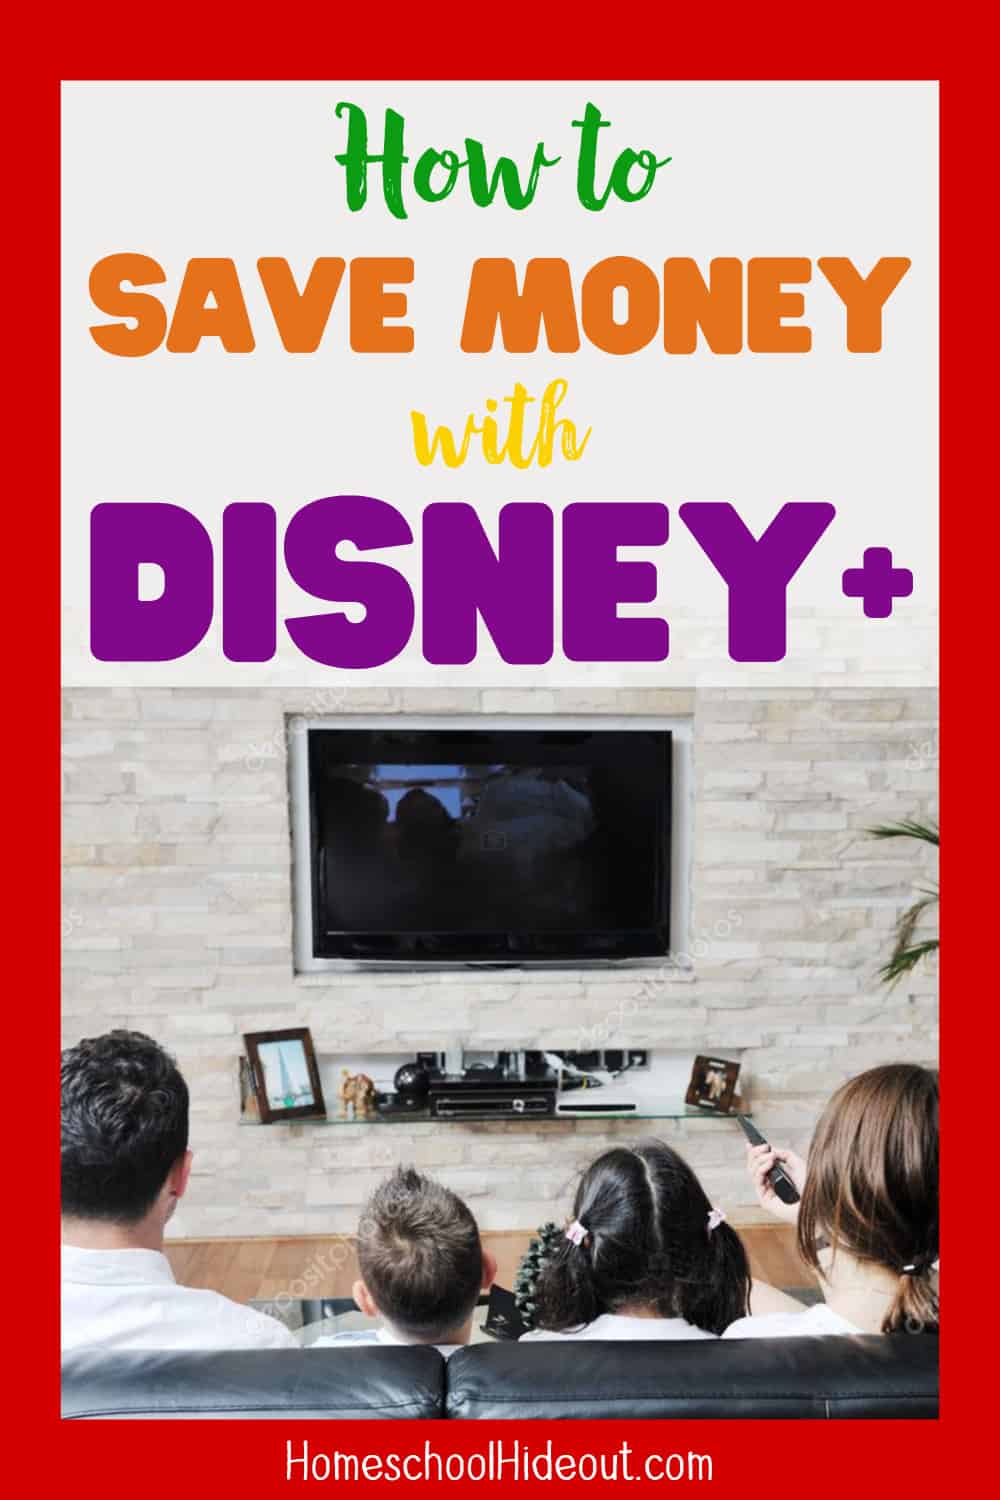 I never knew you could save money with Disney+! This is so awesome!!!